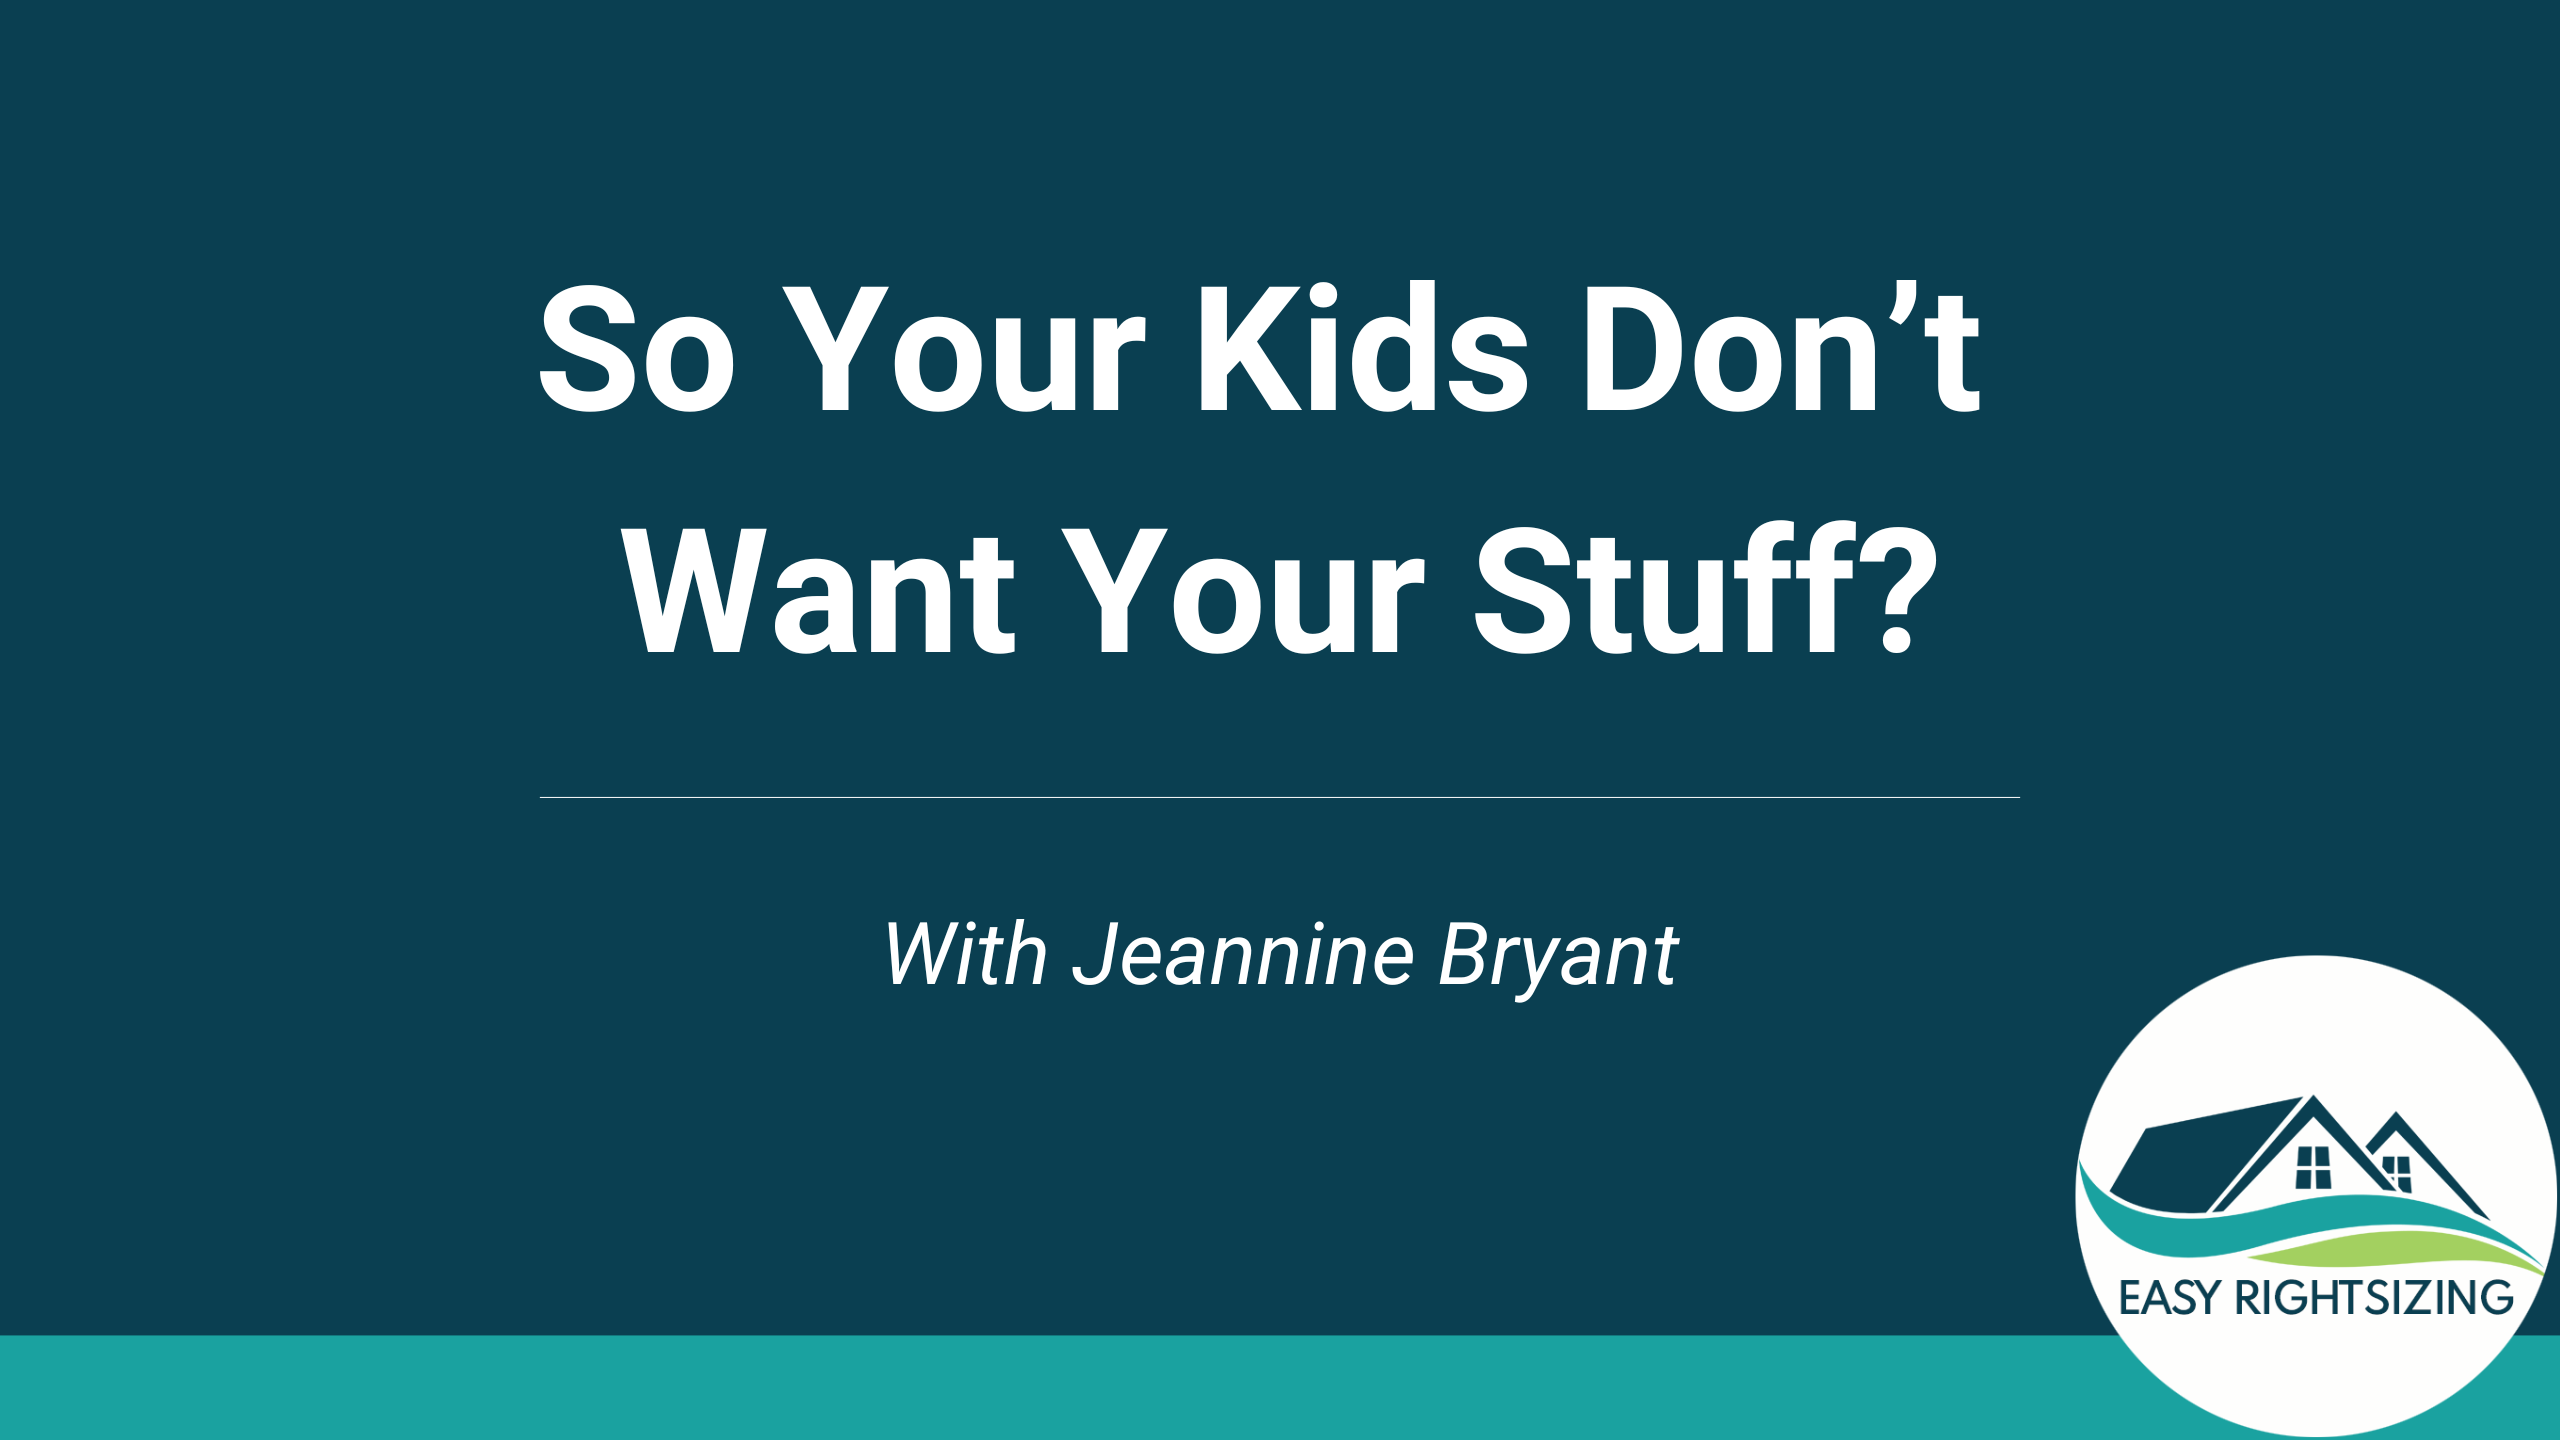 So Your Kids Don’t Want Your Stuff?